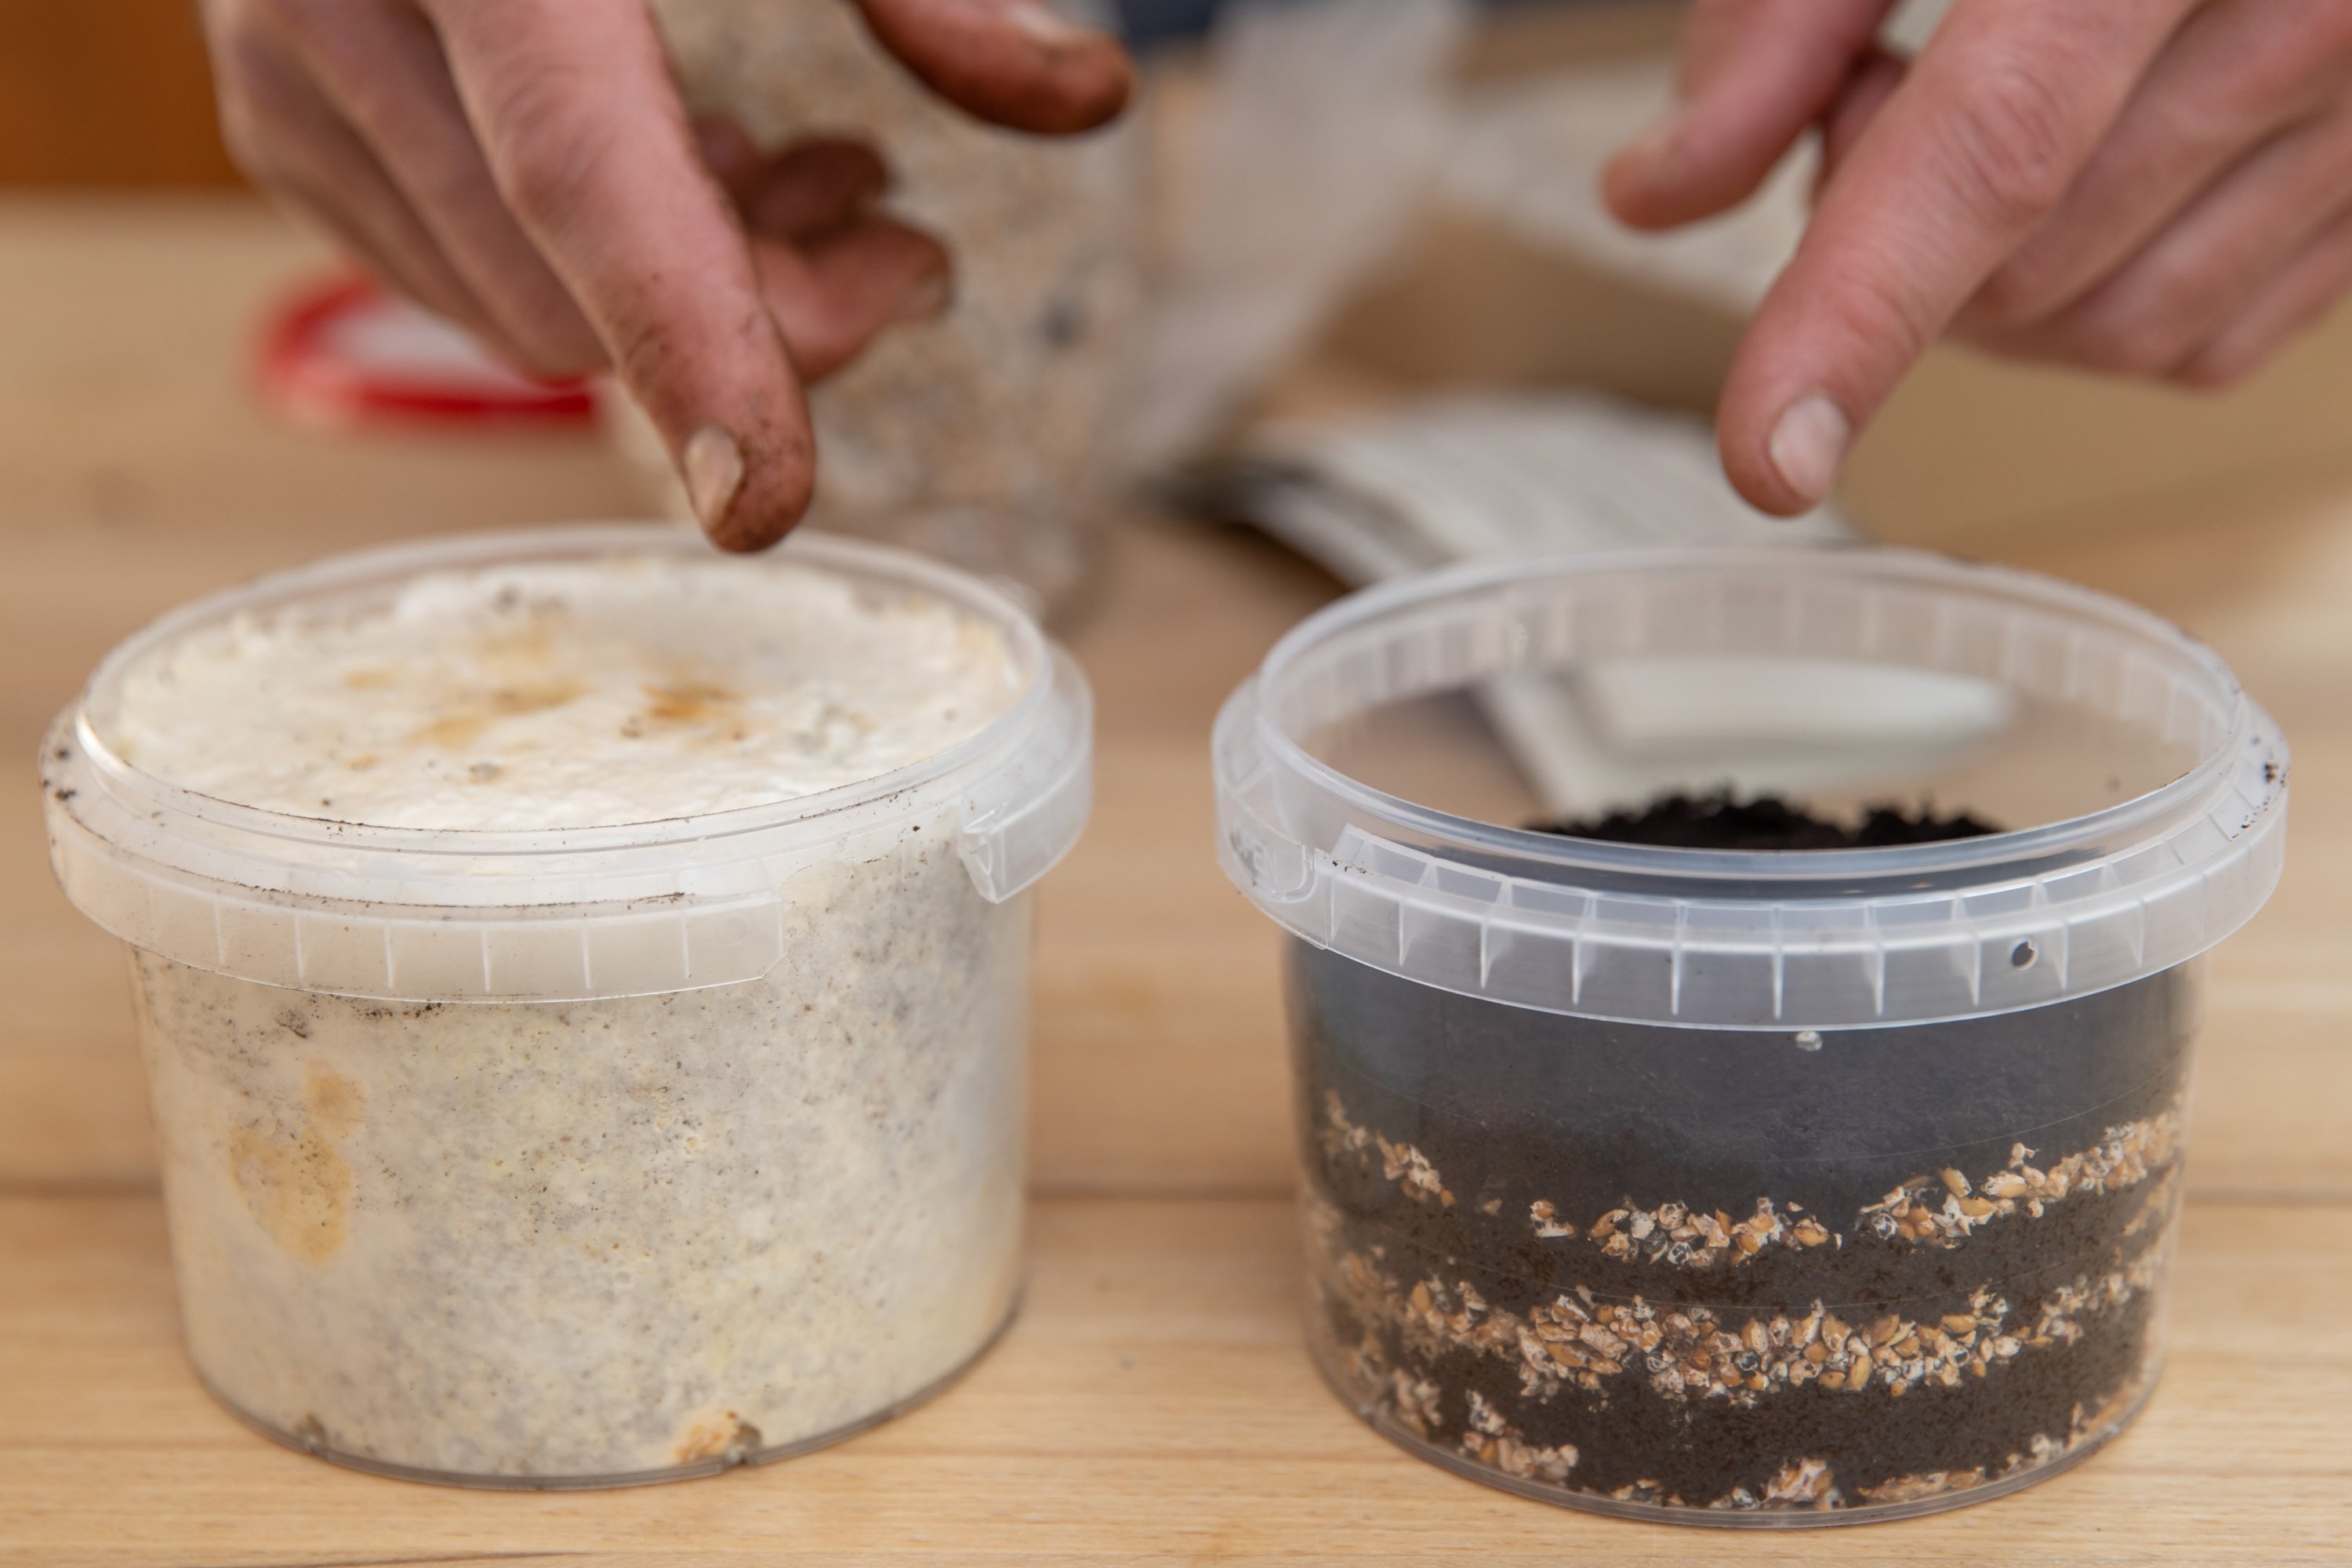 Ralph Haydl points to an oyster mushroom cultivation set with a coffee ground-based substrate (R) and, in contrast, another set already in an advanced stage of growth. (Getty Images)